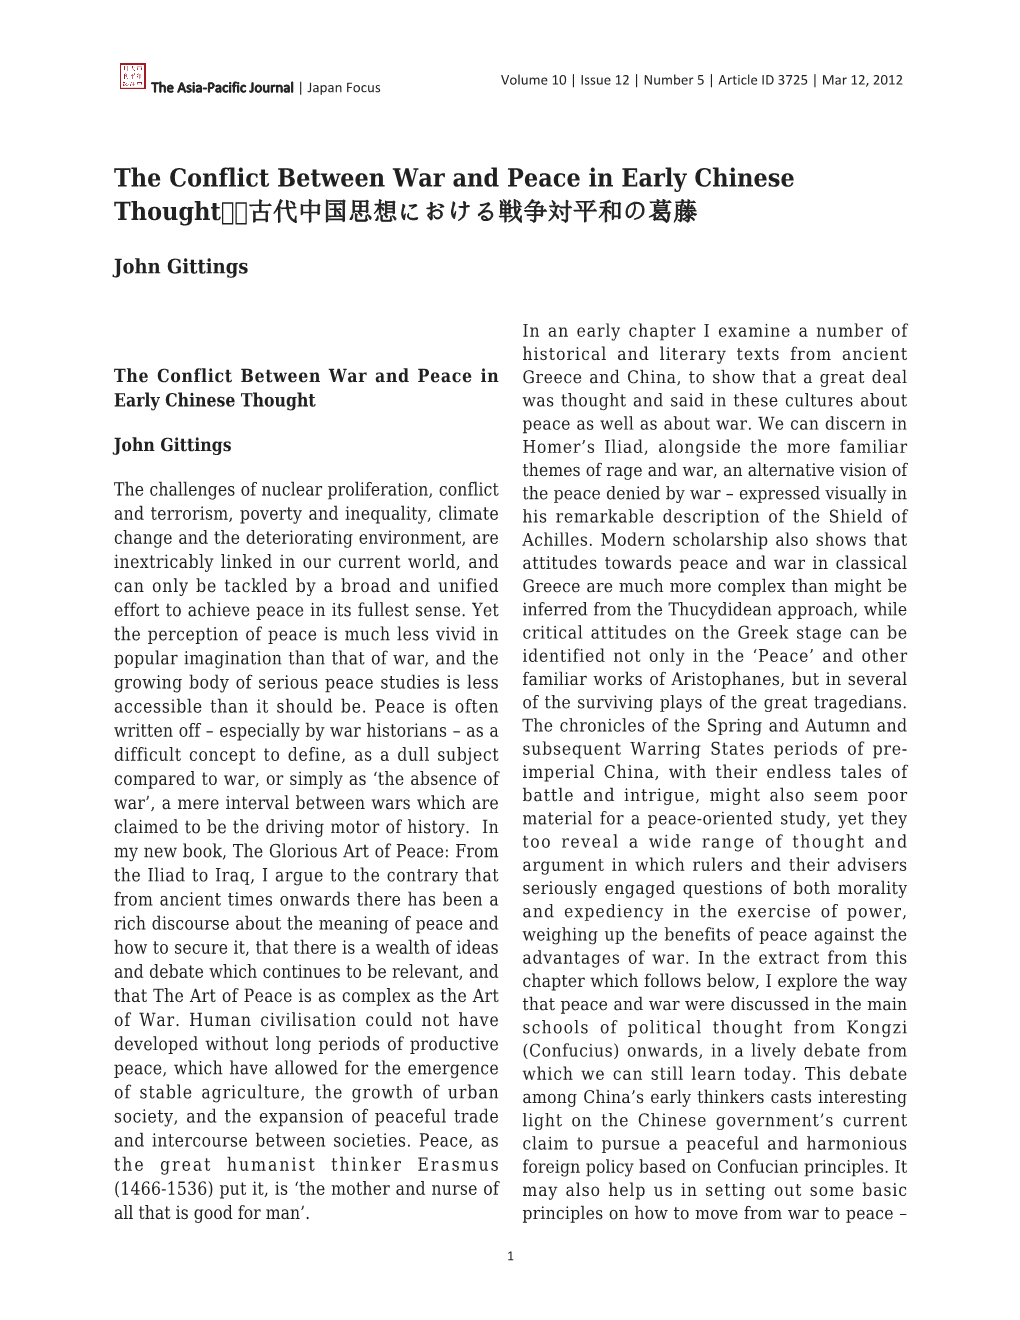 The Conflict Between War and Peace in Early Chinese Thought 古代中国思想における戦争対平和の葛藤